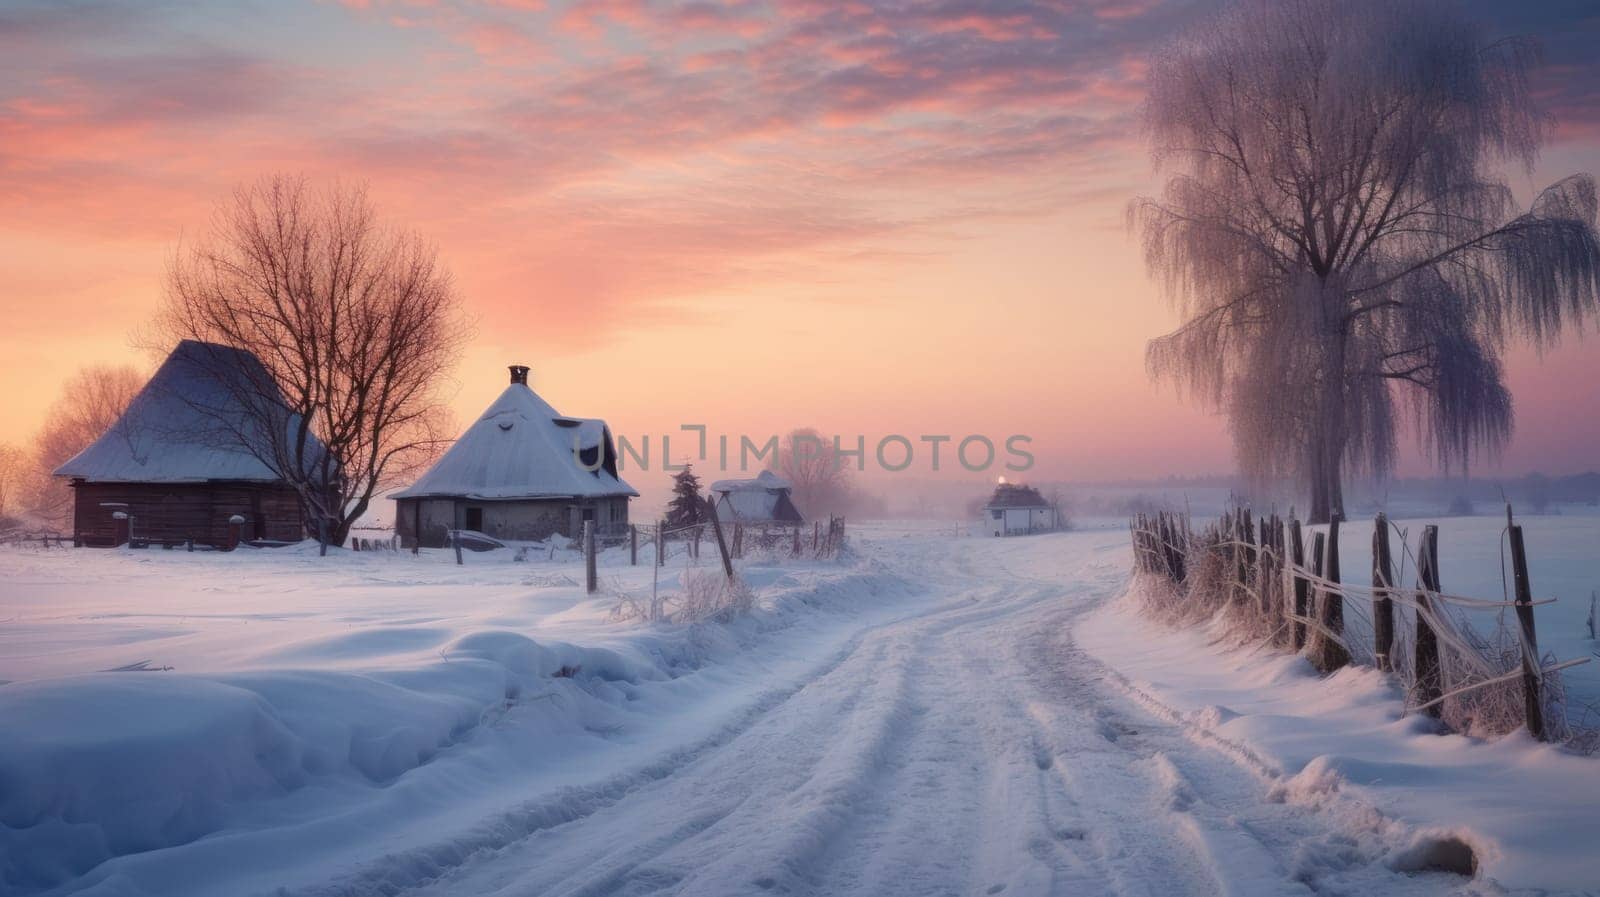 A small, cozy, homely house in a village surrounded by a snow-covered landscape of beautiful nature and winter. by Alla_Yurtayeva